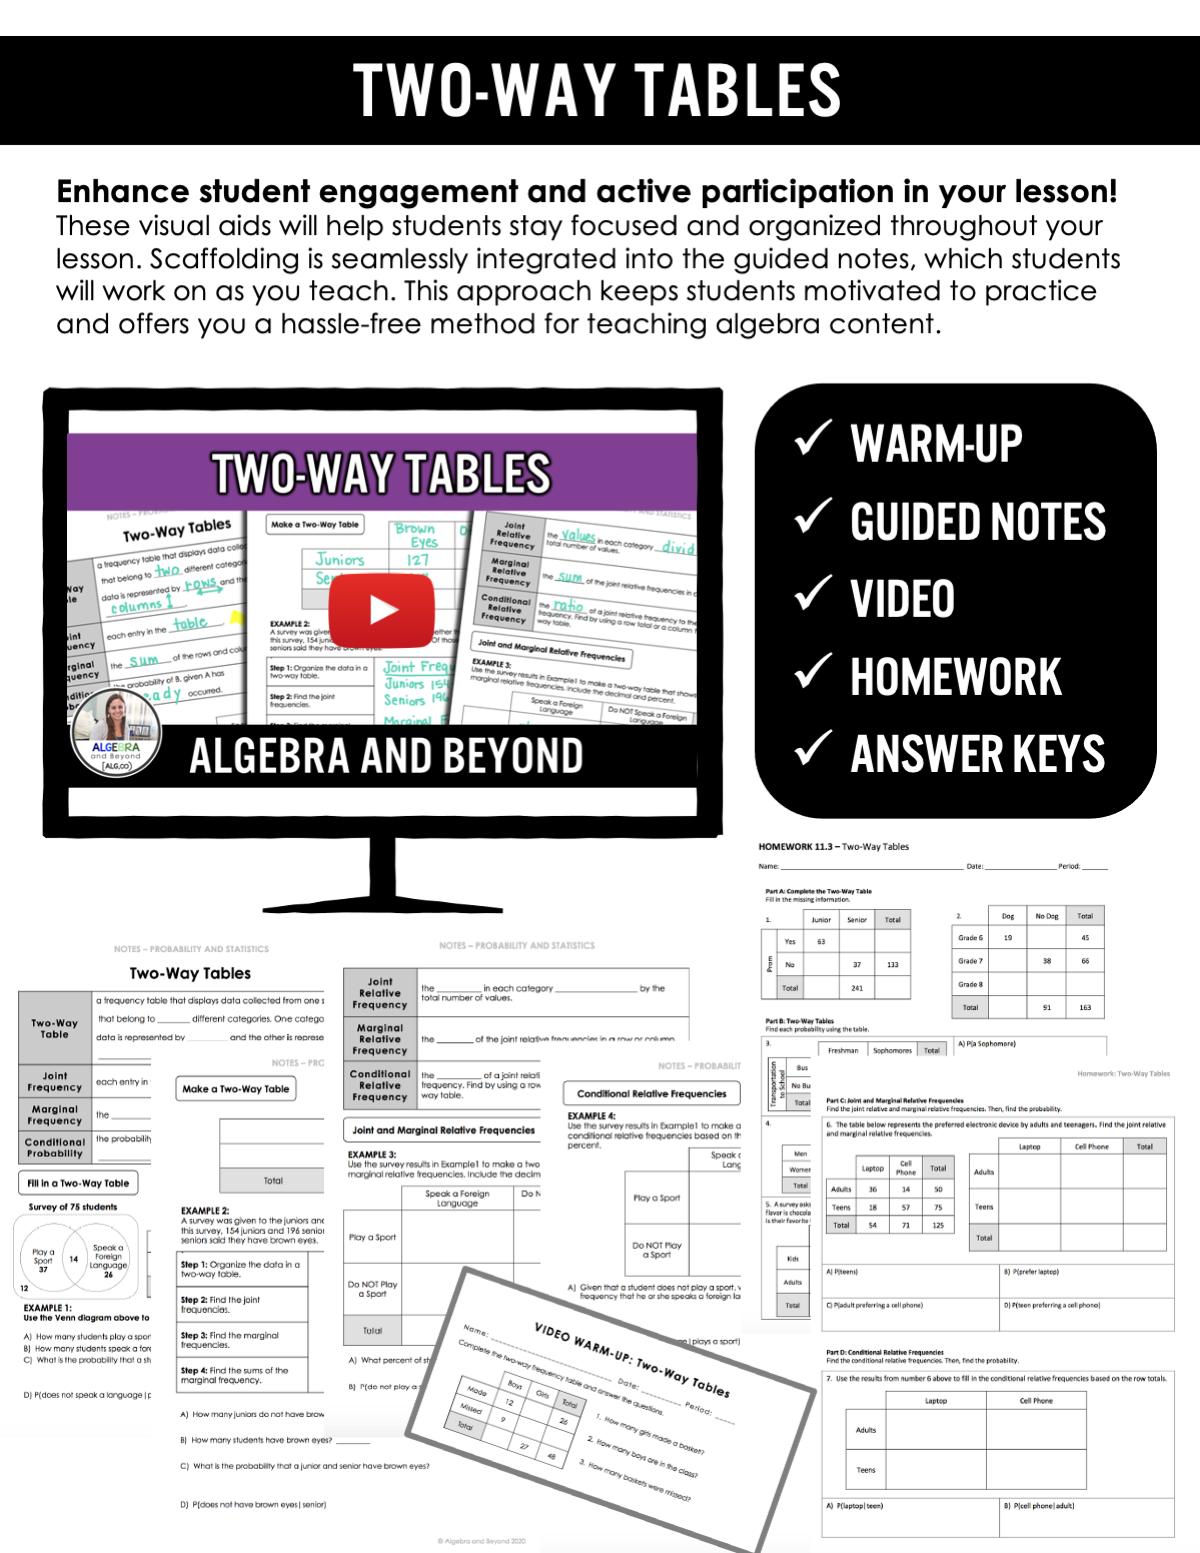 Two-Way Tables Lesson | Video | Guided Notes | Homework